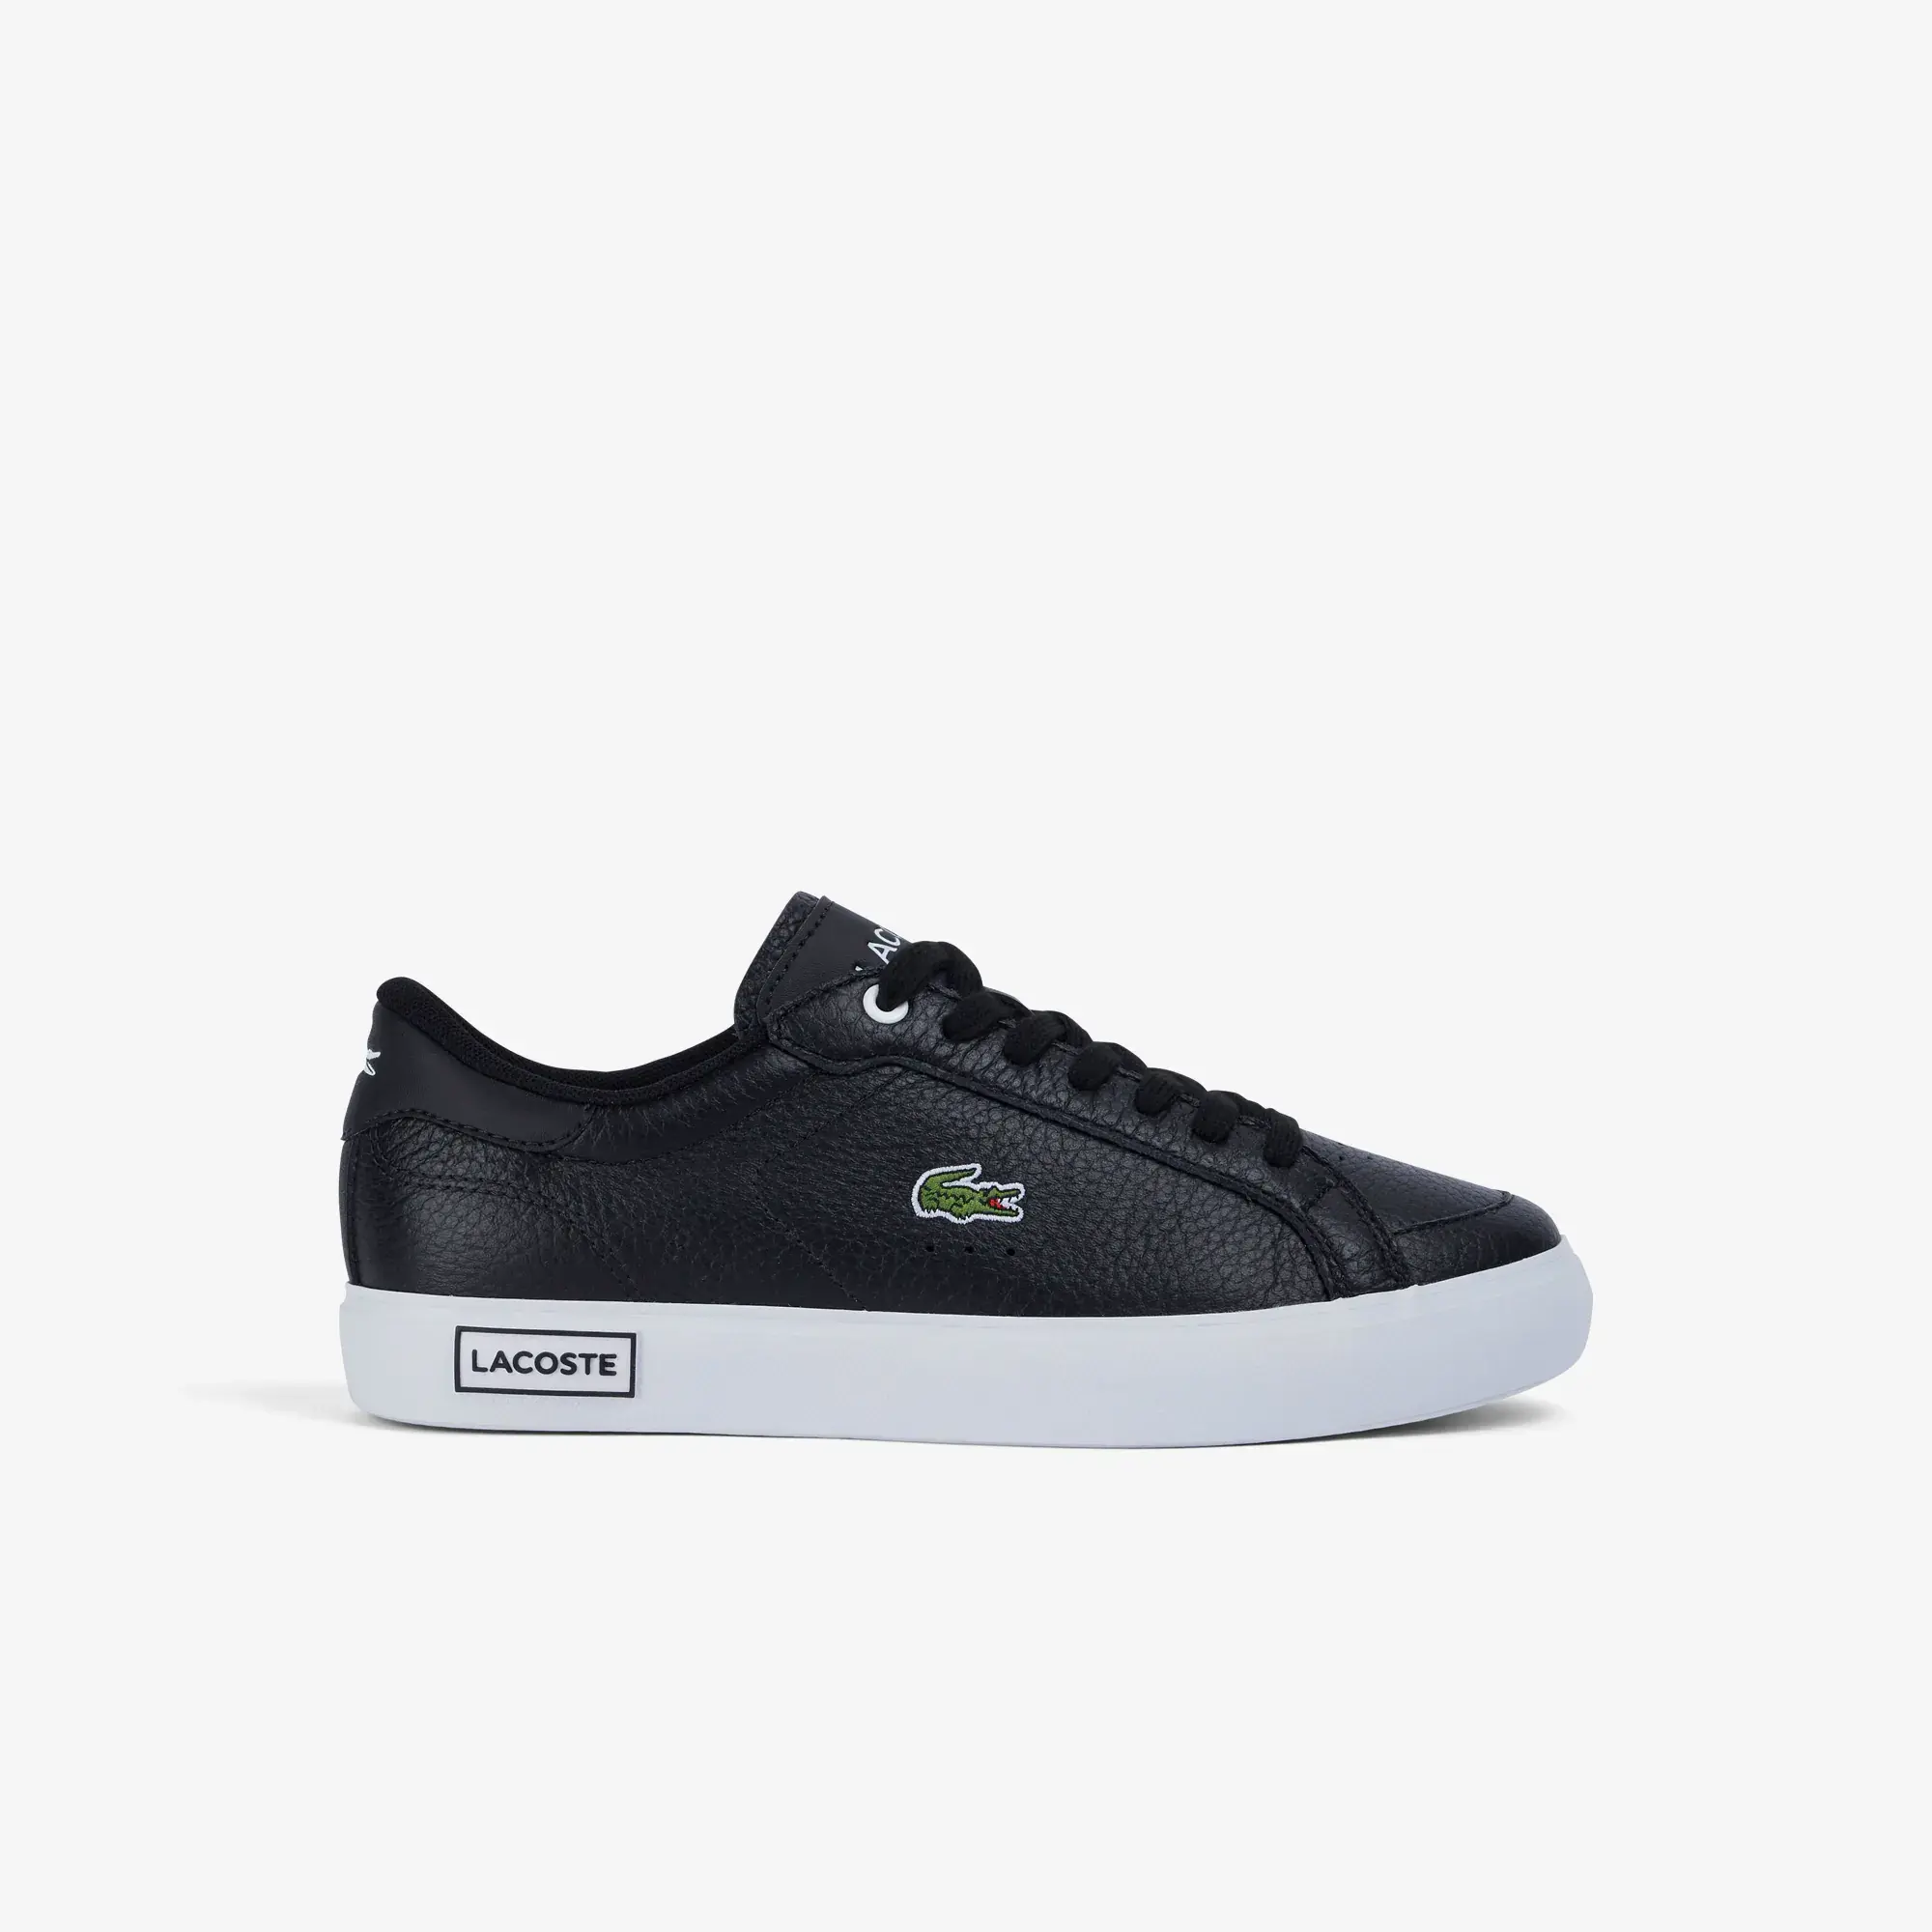 Lacoste Women's Powercourt Leather Detailed Sneakers. 1